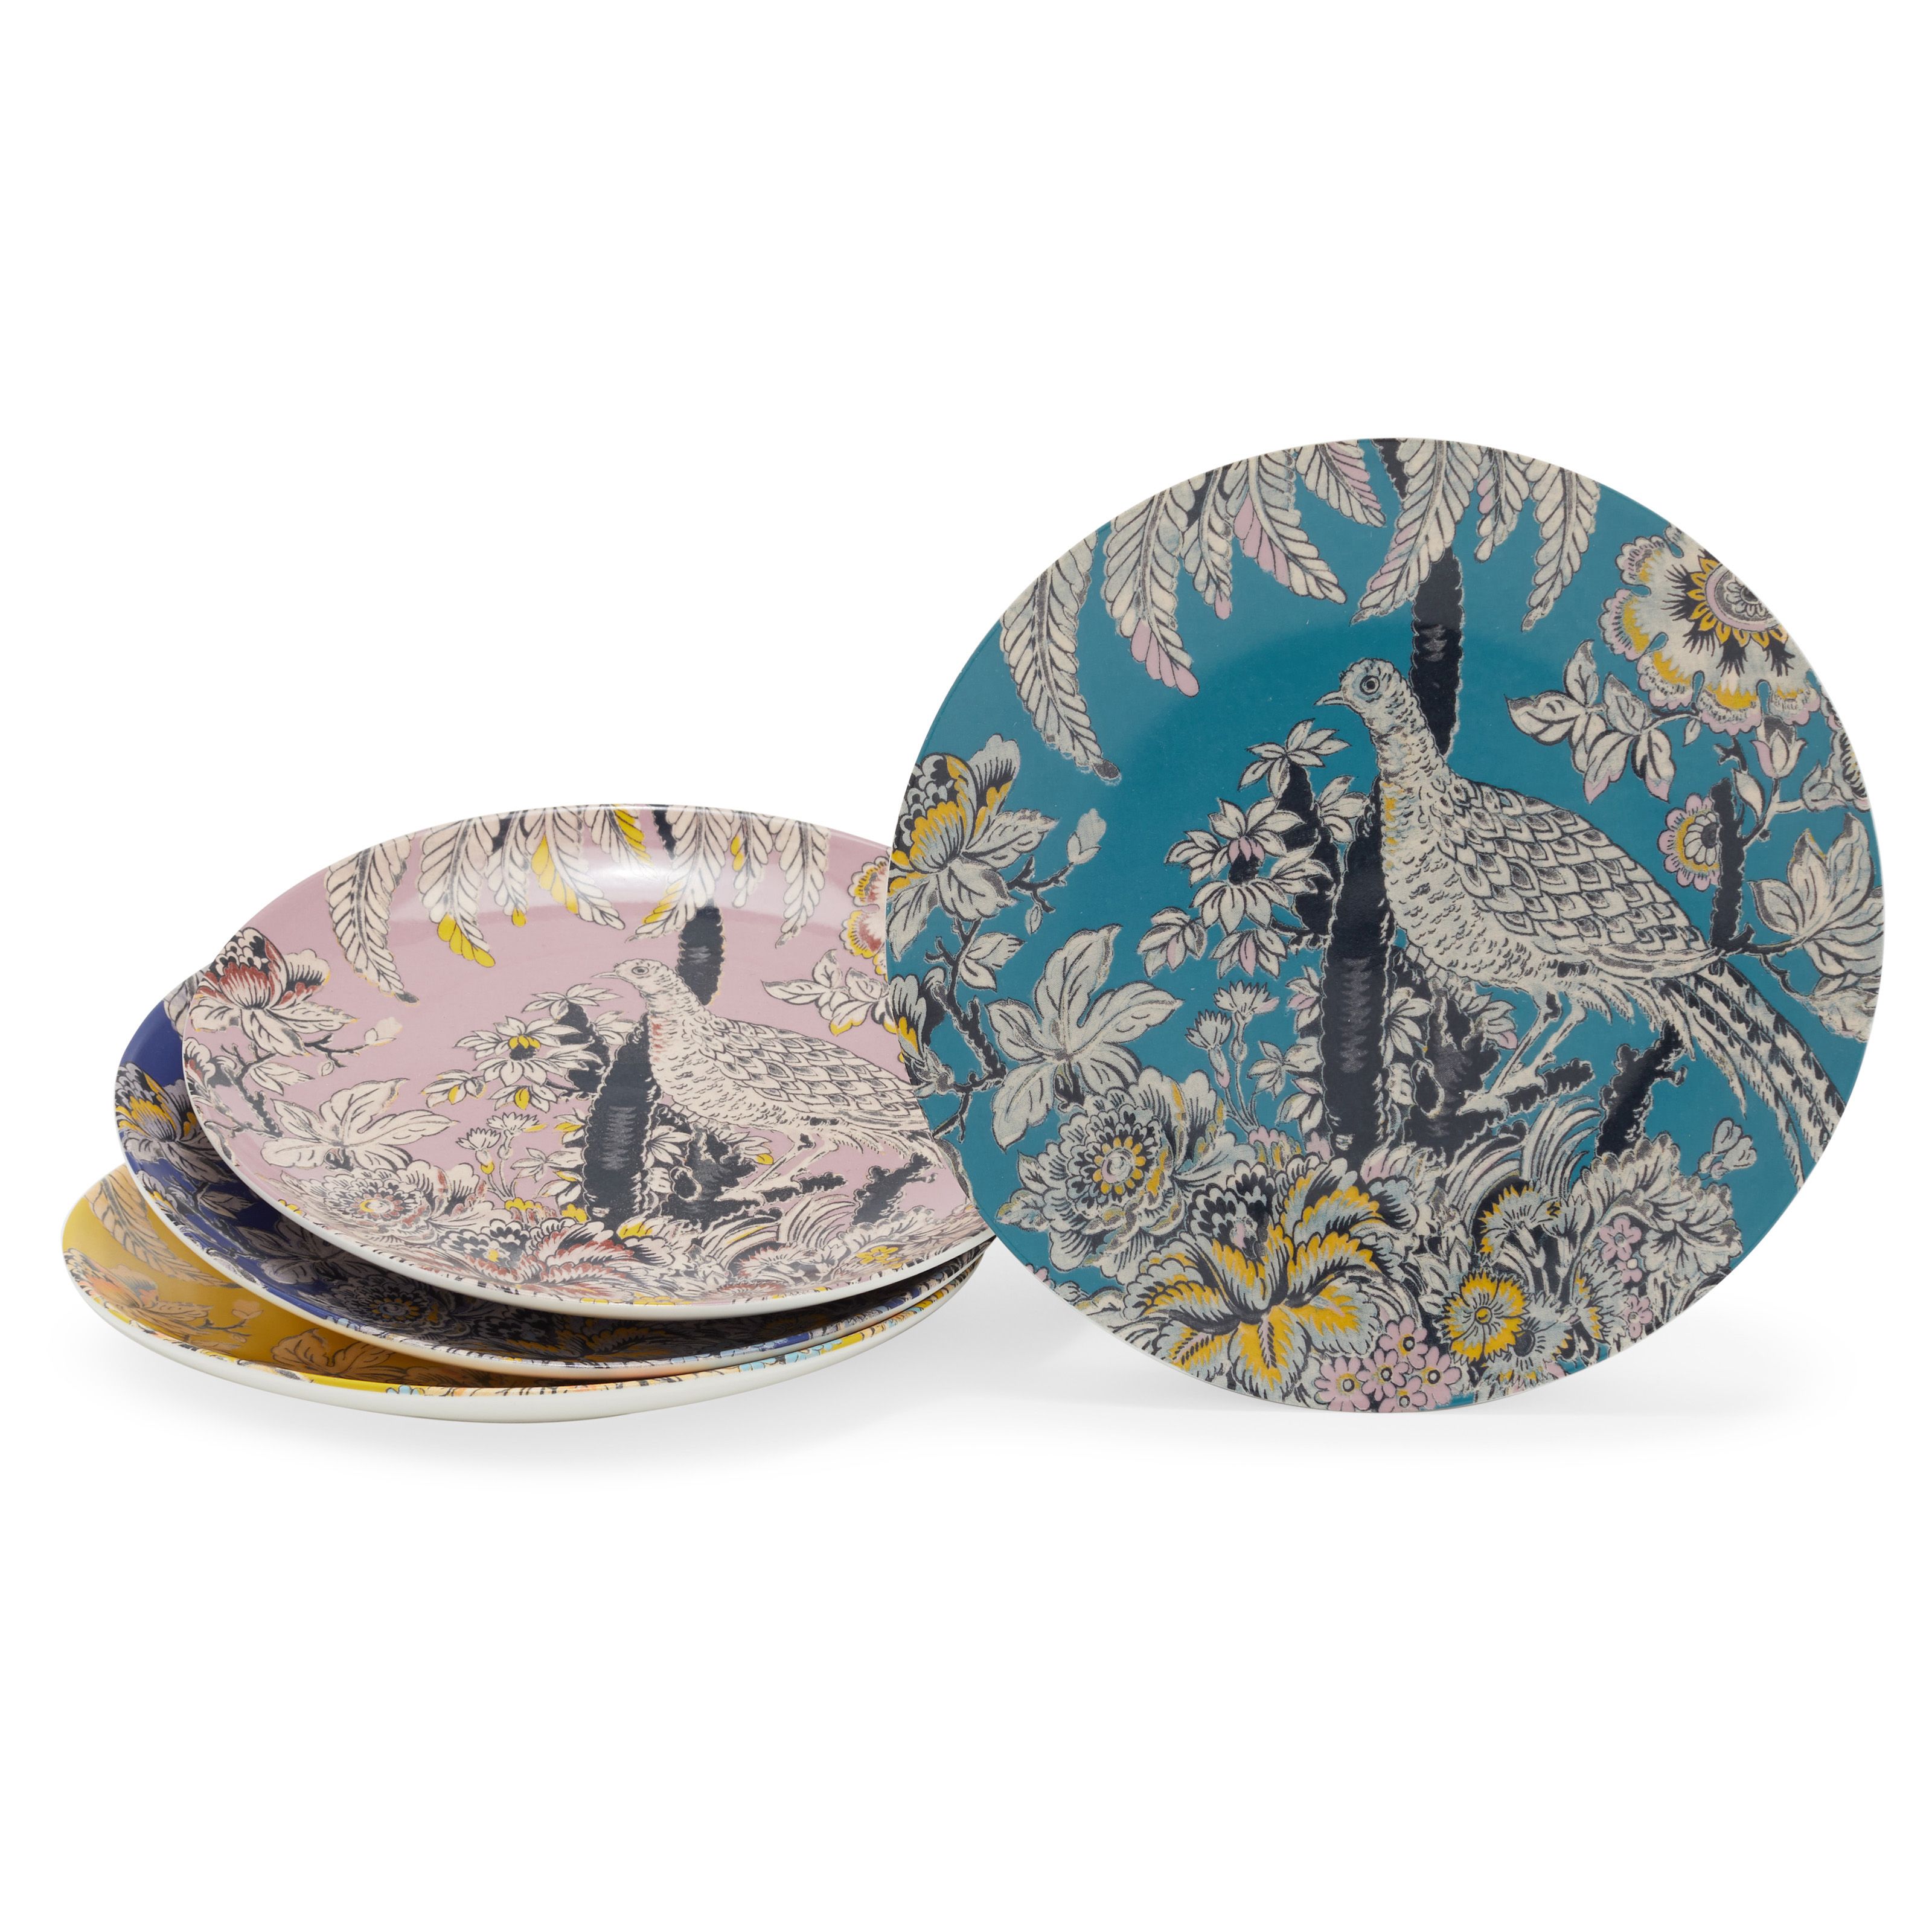 Tropical Toile Bird Mix and Match 4 Piece Appetizer Plate Set